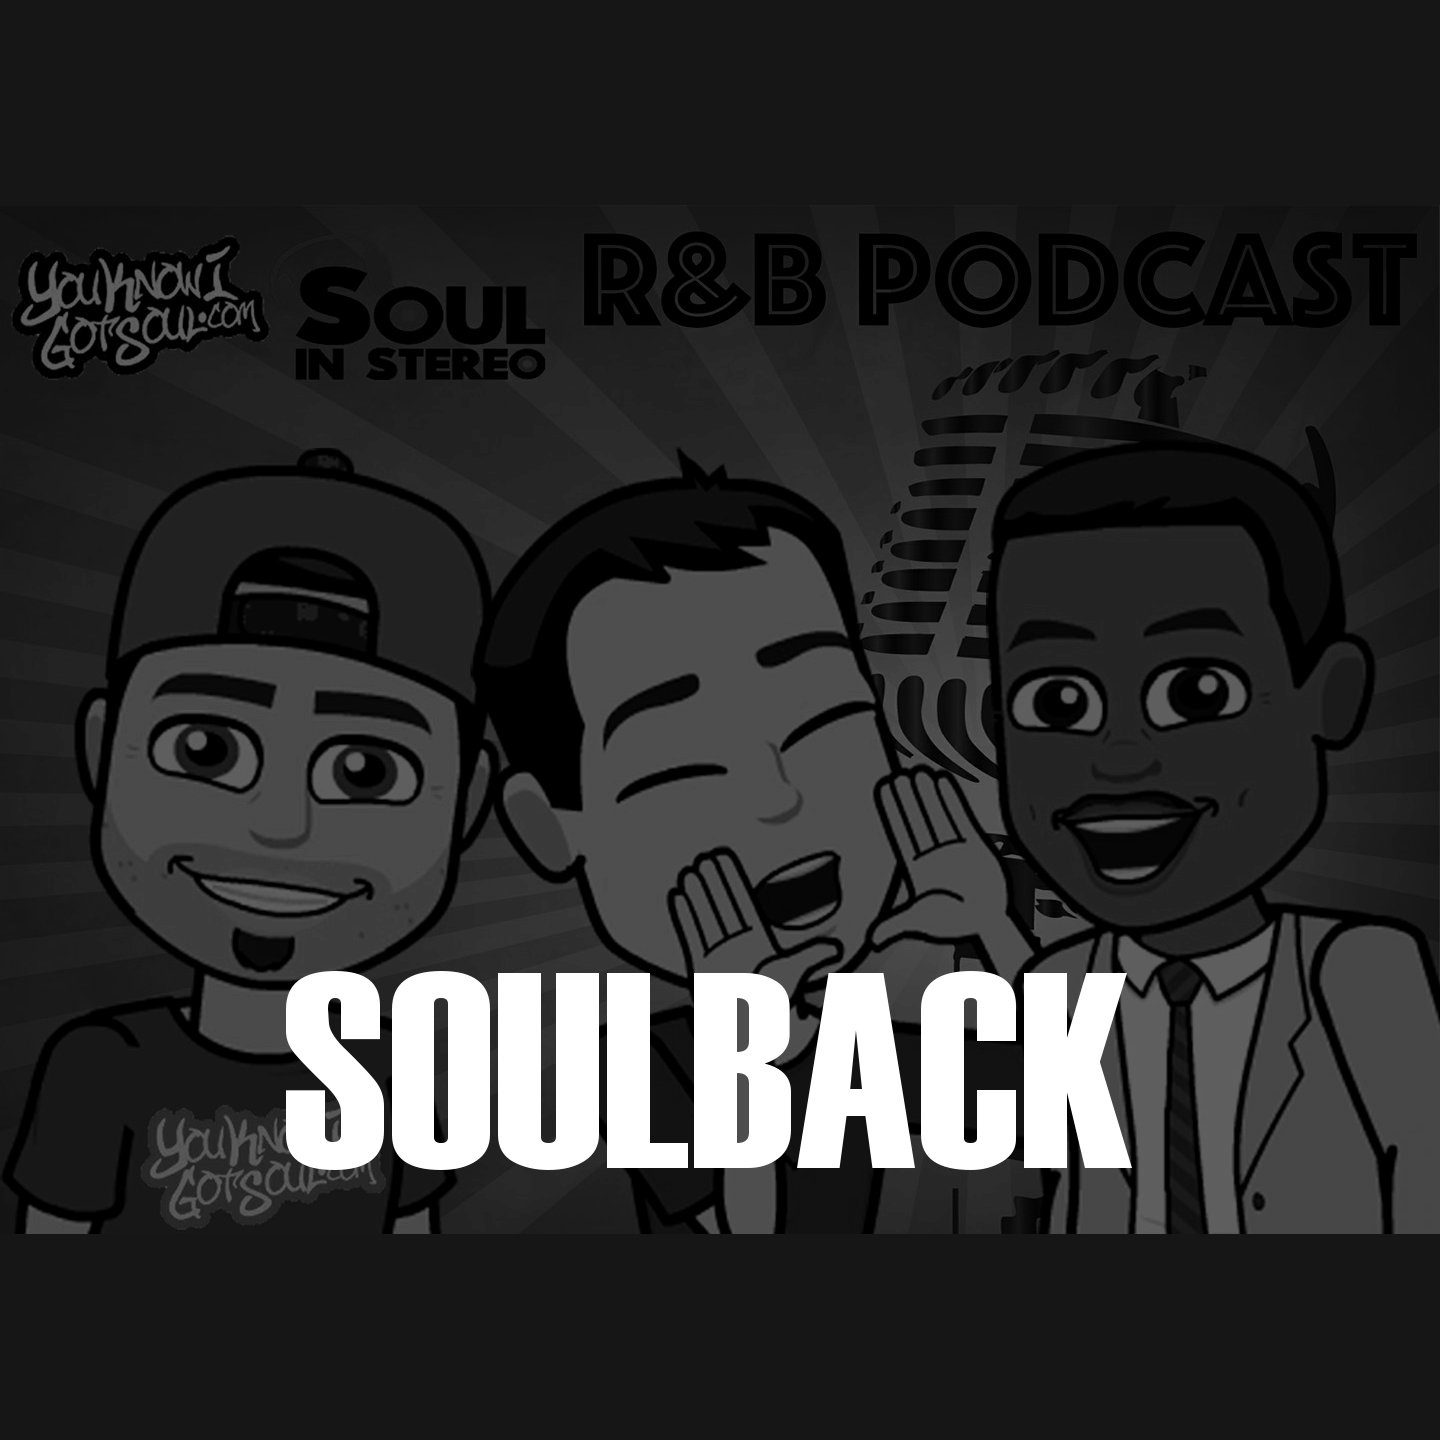 SoulBack (featuring Rico Love) – The R&B Podcast Episode 10